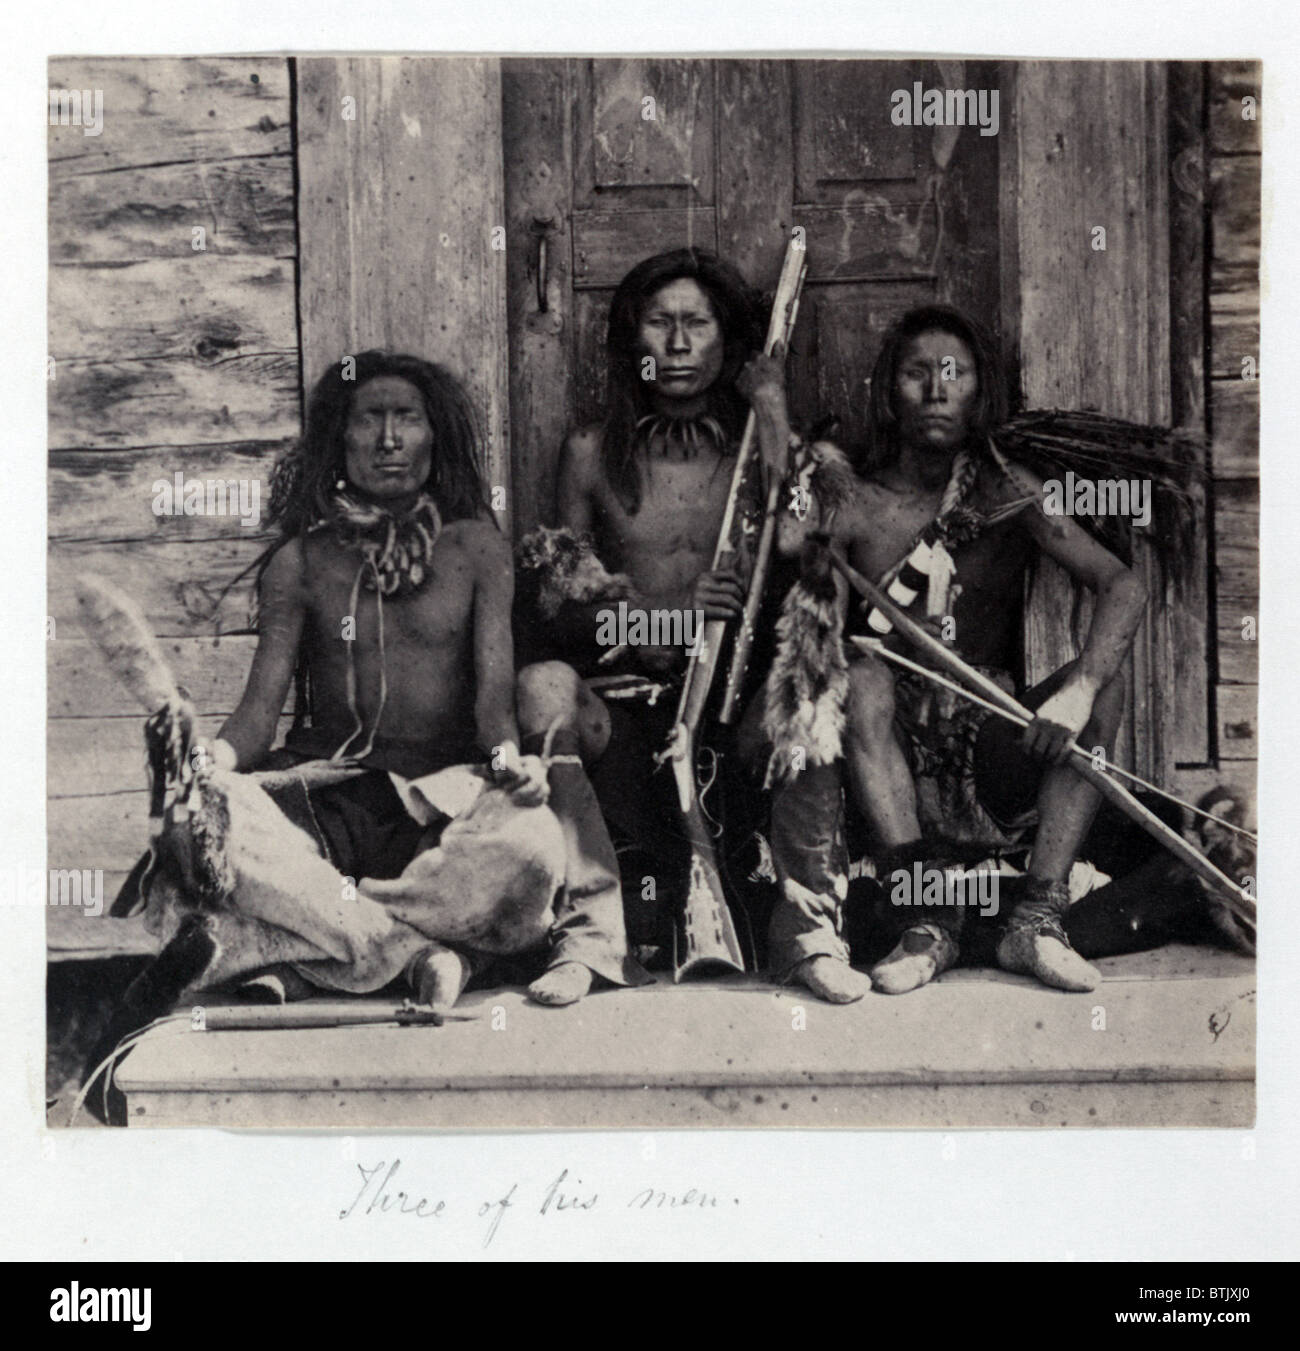 Three Native American Indians, detail from diptych titled: 'Garry the Spokan chief and three of his men', photograph, 1861. Stock Photo